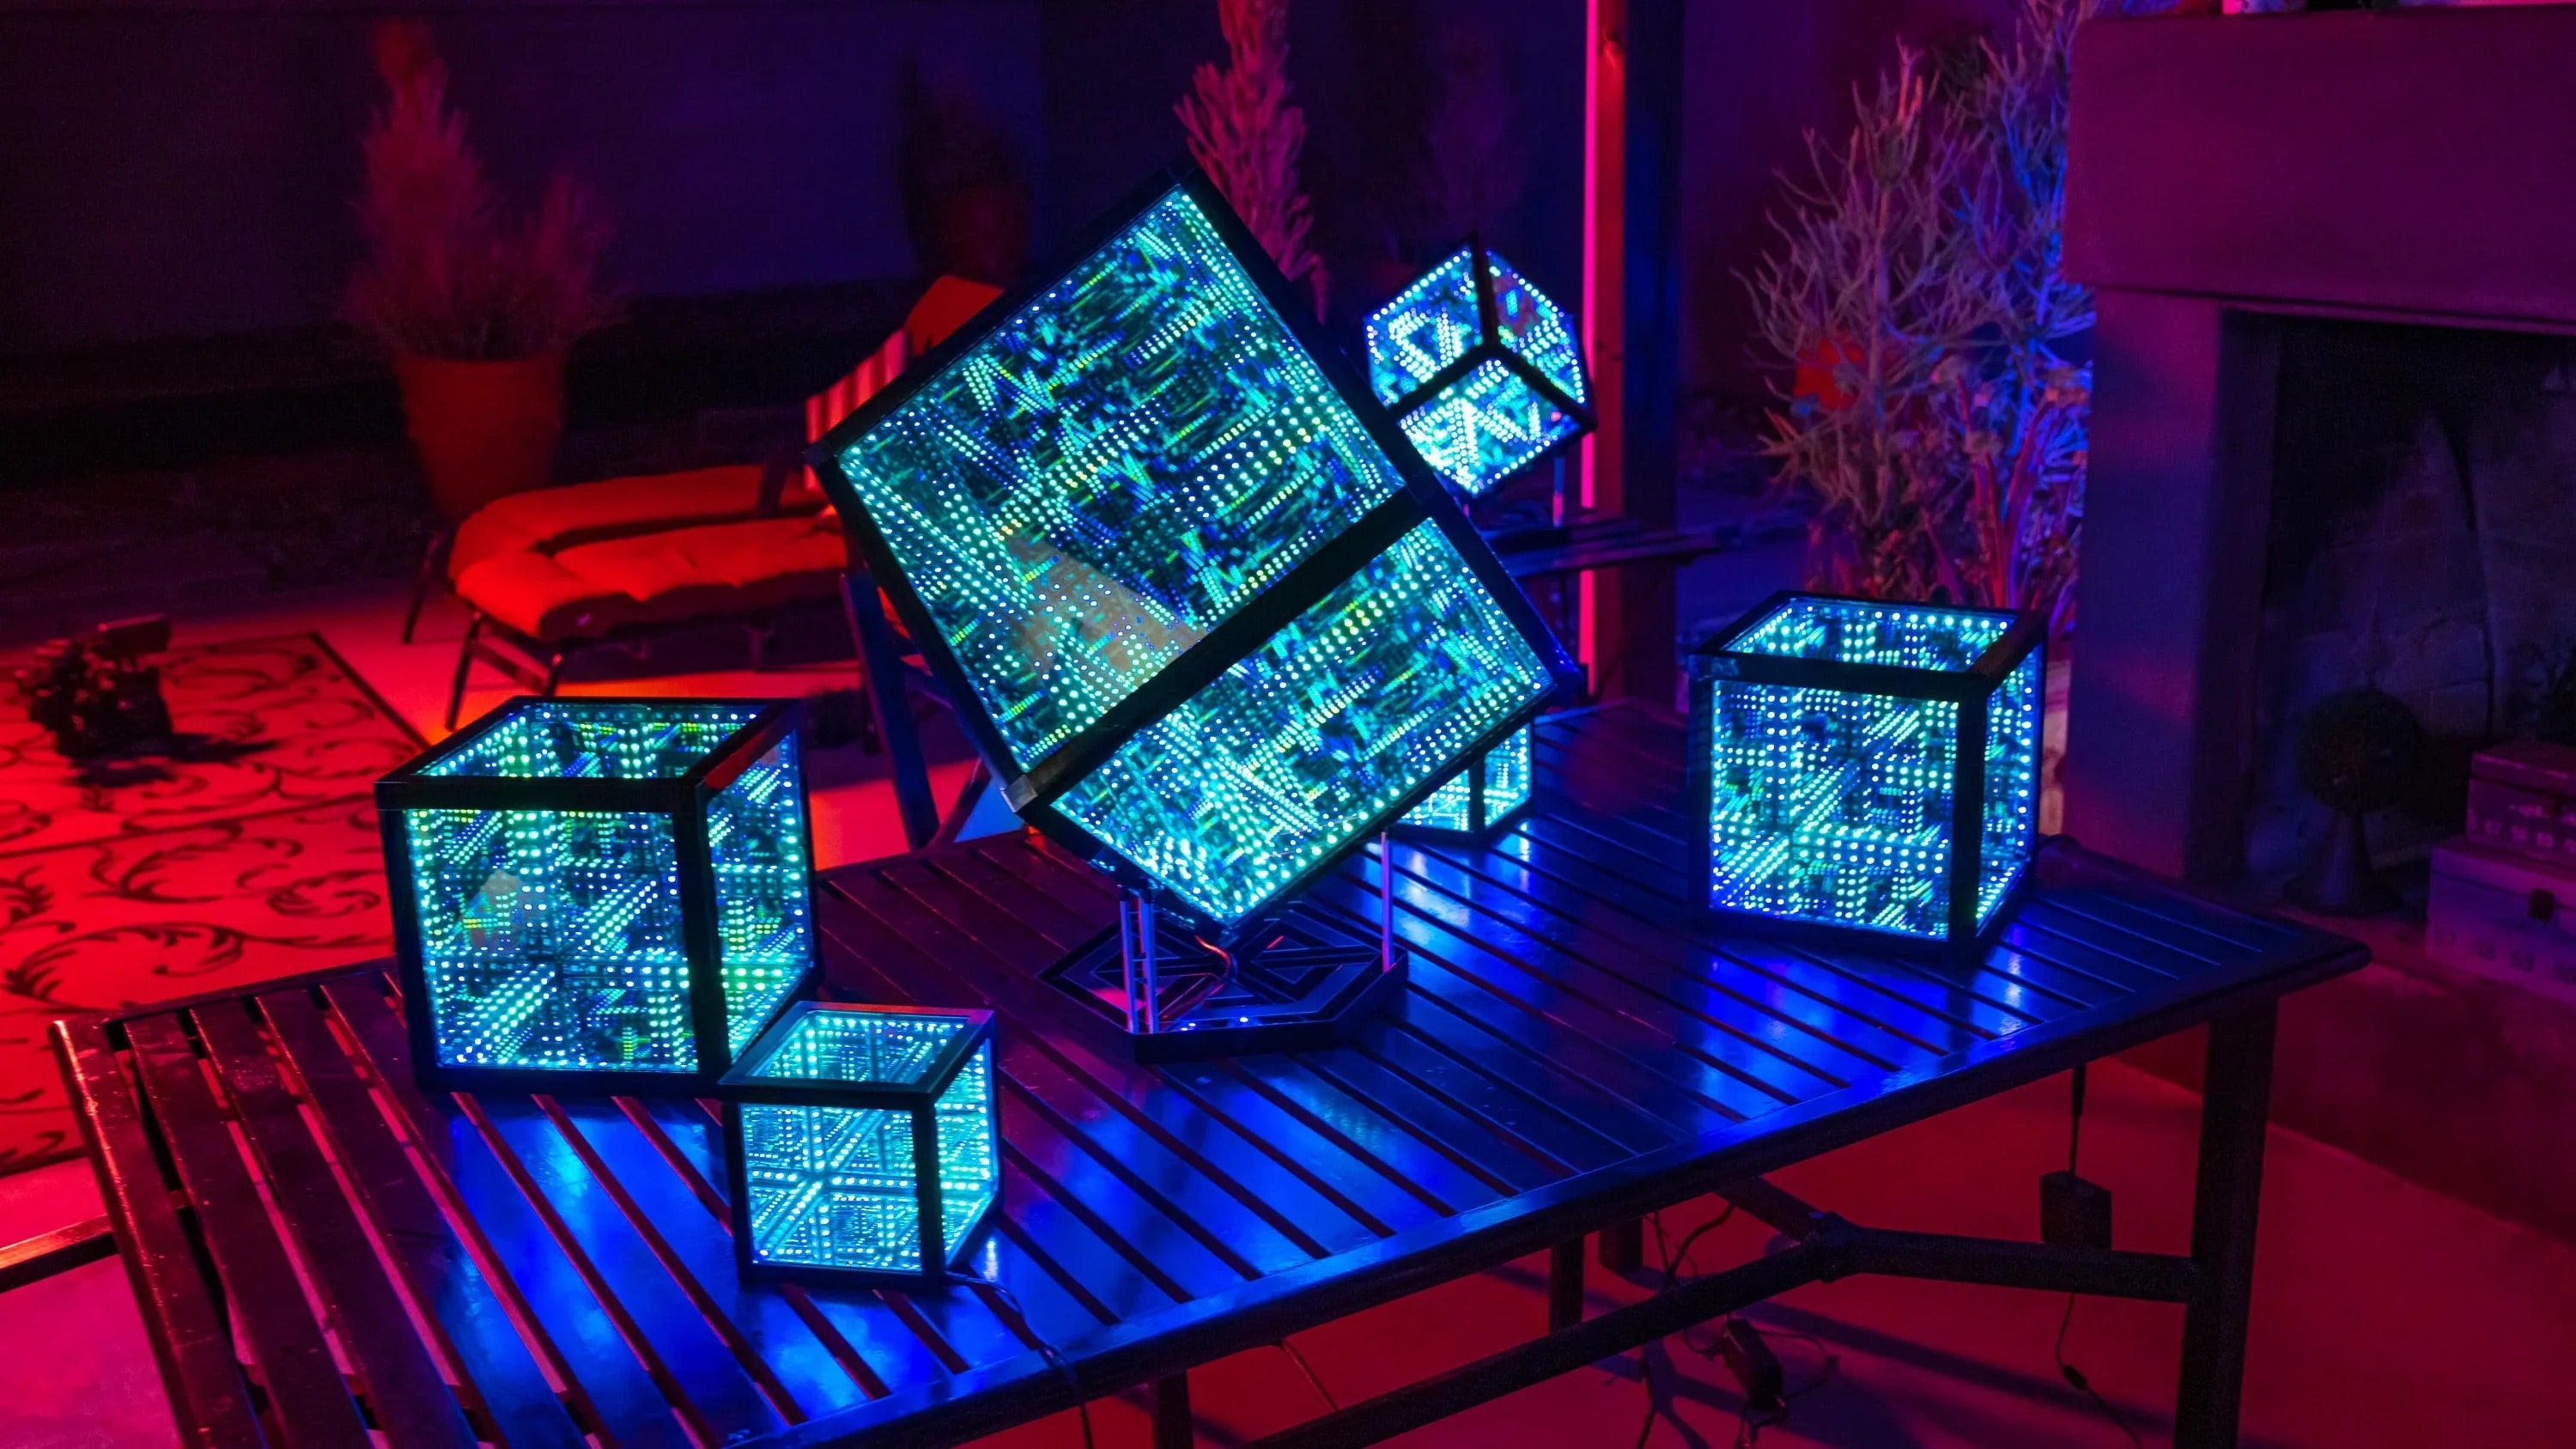 Five cubes with multicolored LED lights placed on patio table for decor